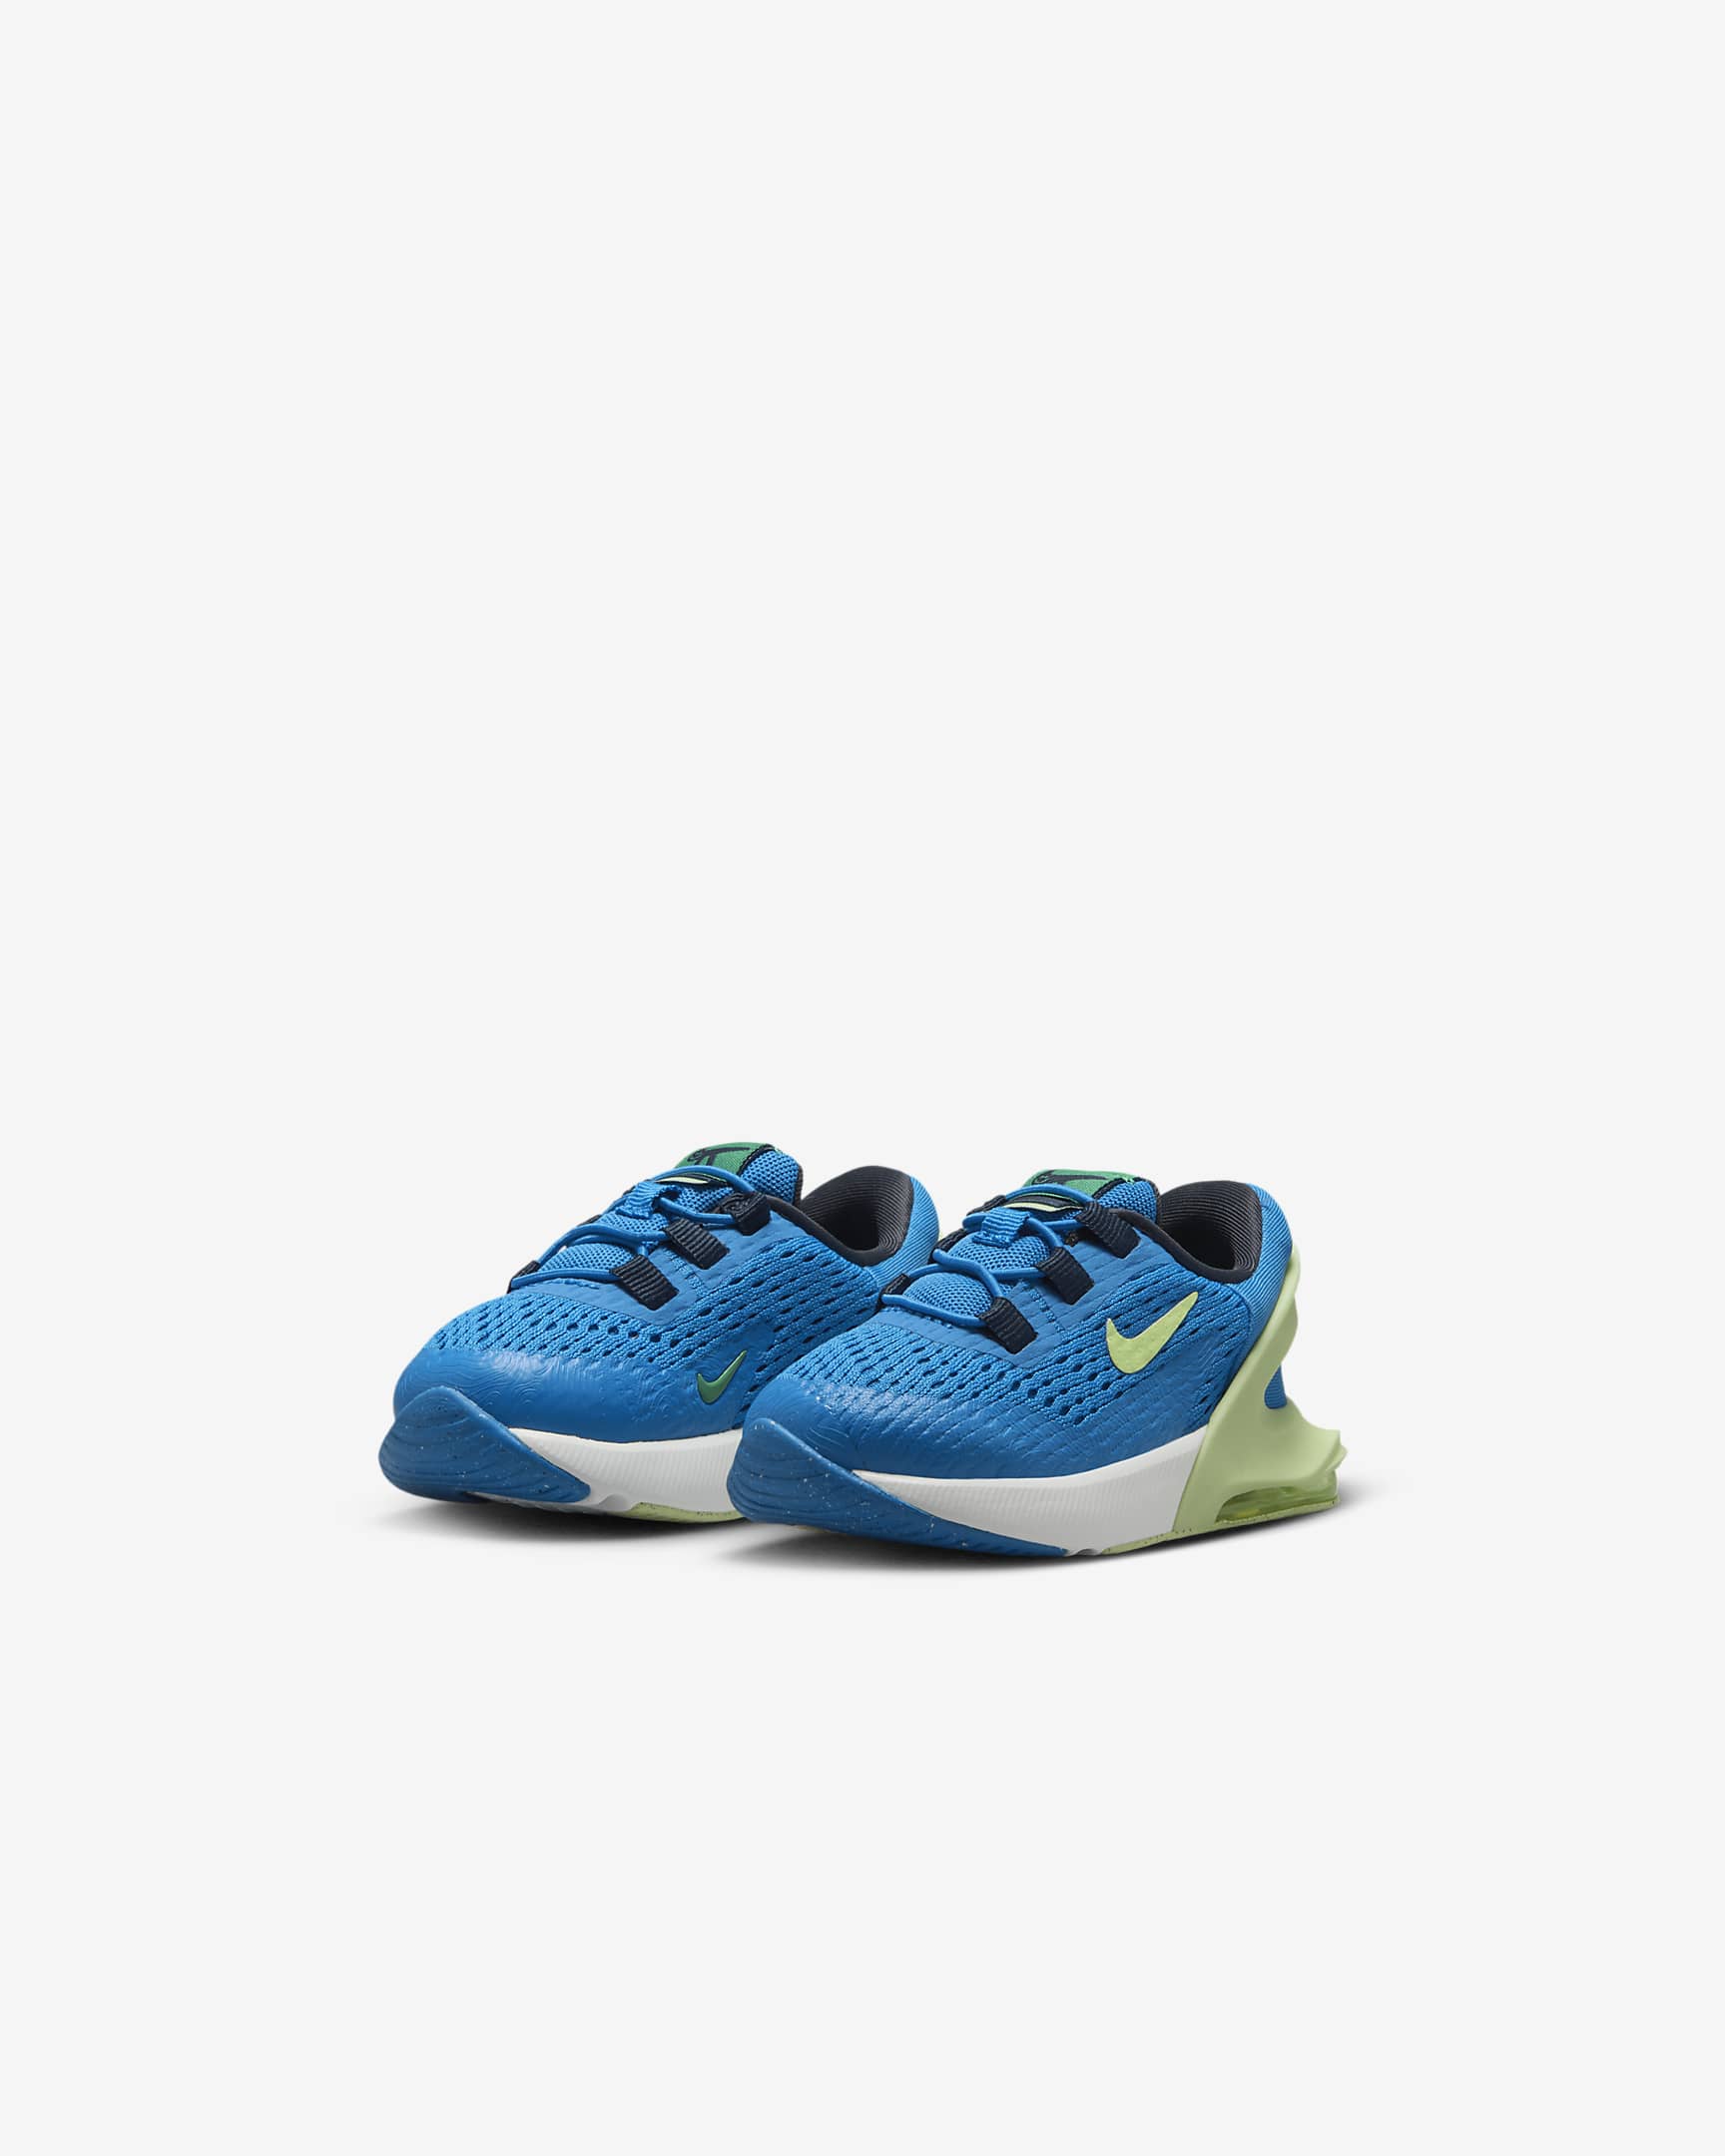 Nike Air Max 270 Go Baby/Toddler Easy On/Off Shoes - Light Photo Blue/Summit White/Stadium Green/Barely Volt